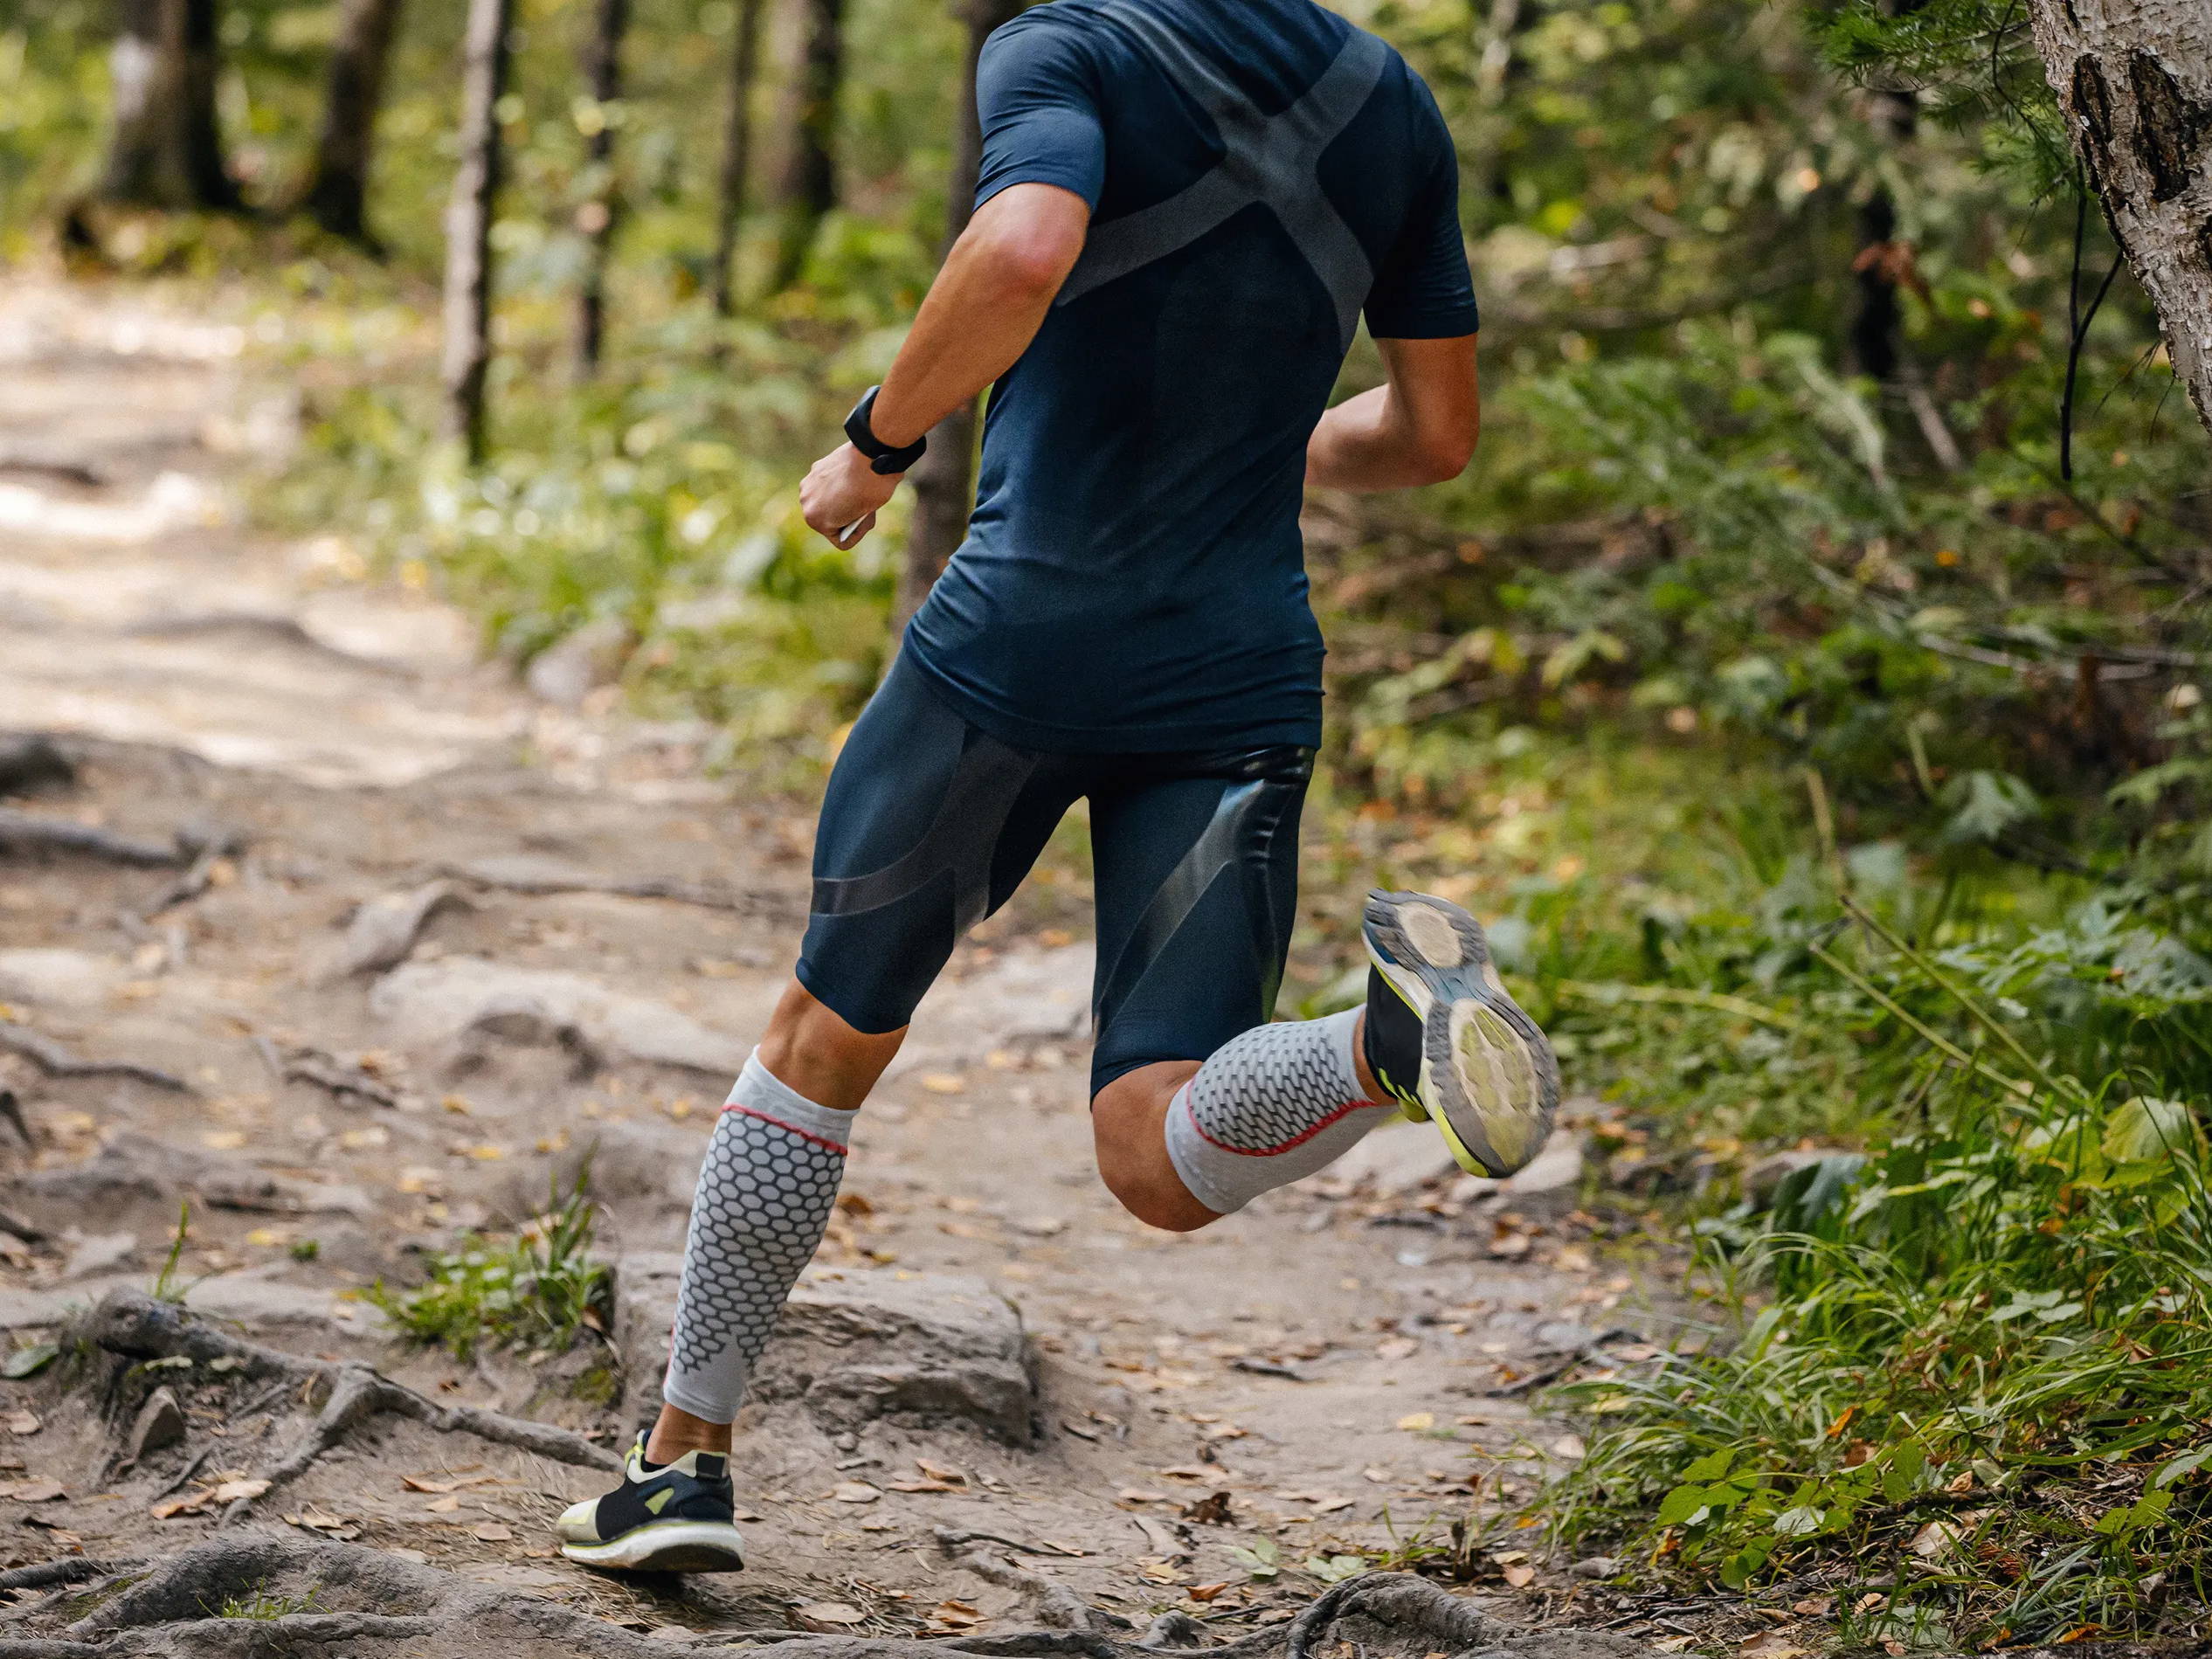 Man running on trail in compression sleeves